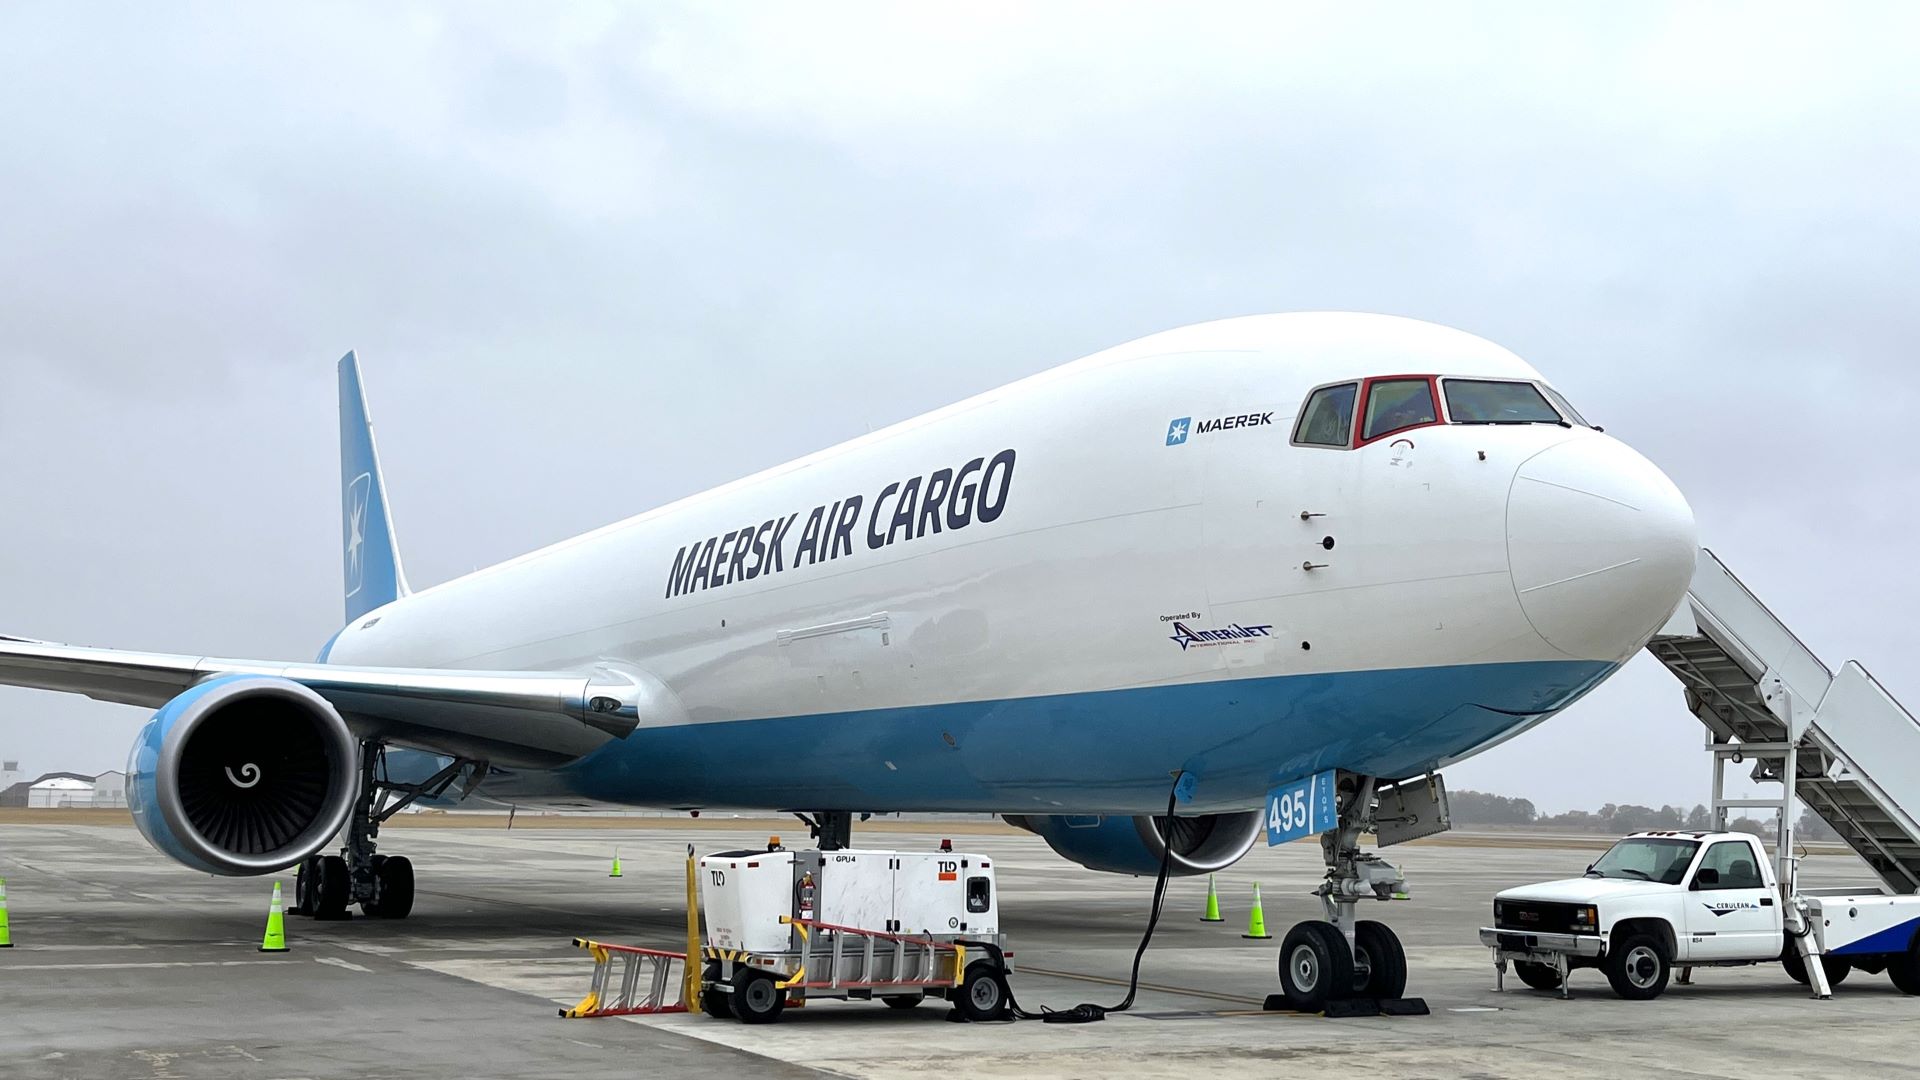 Maersk Air Cargo 767 parked on the ground